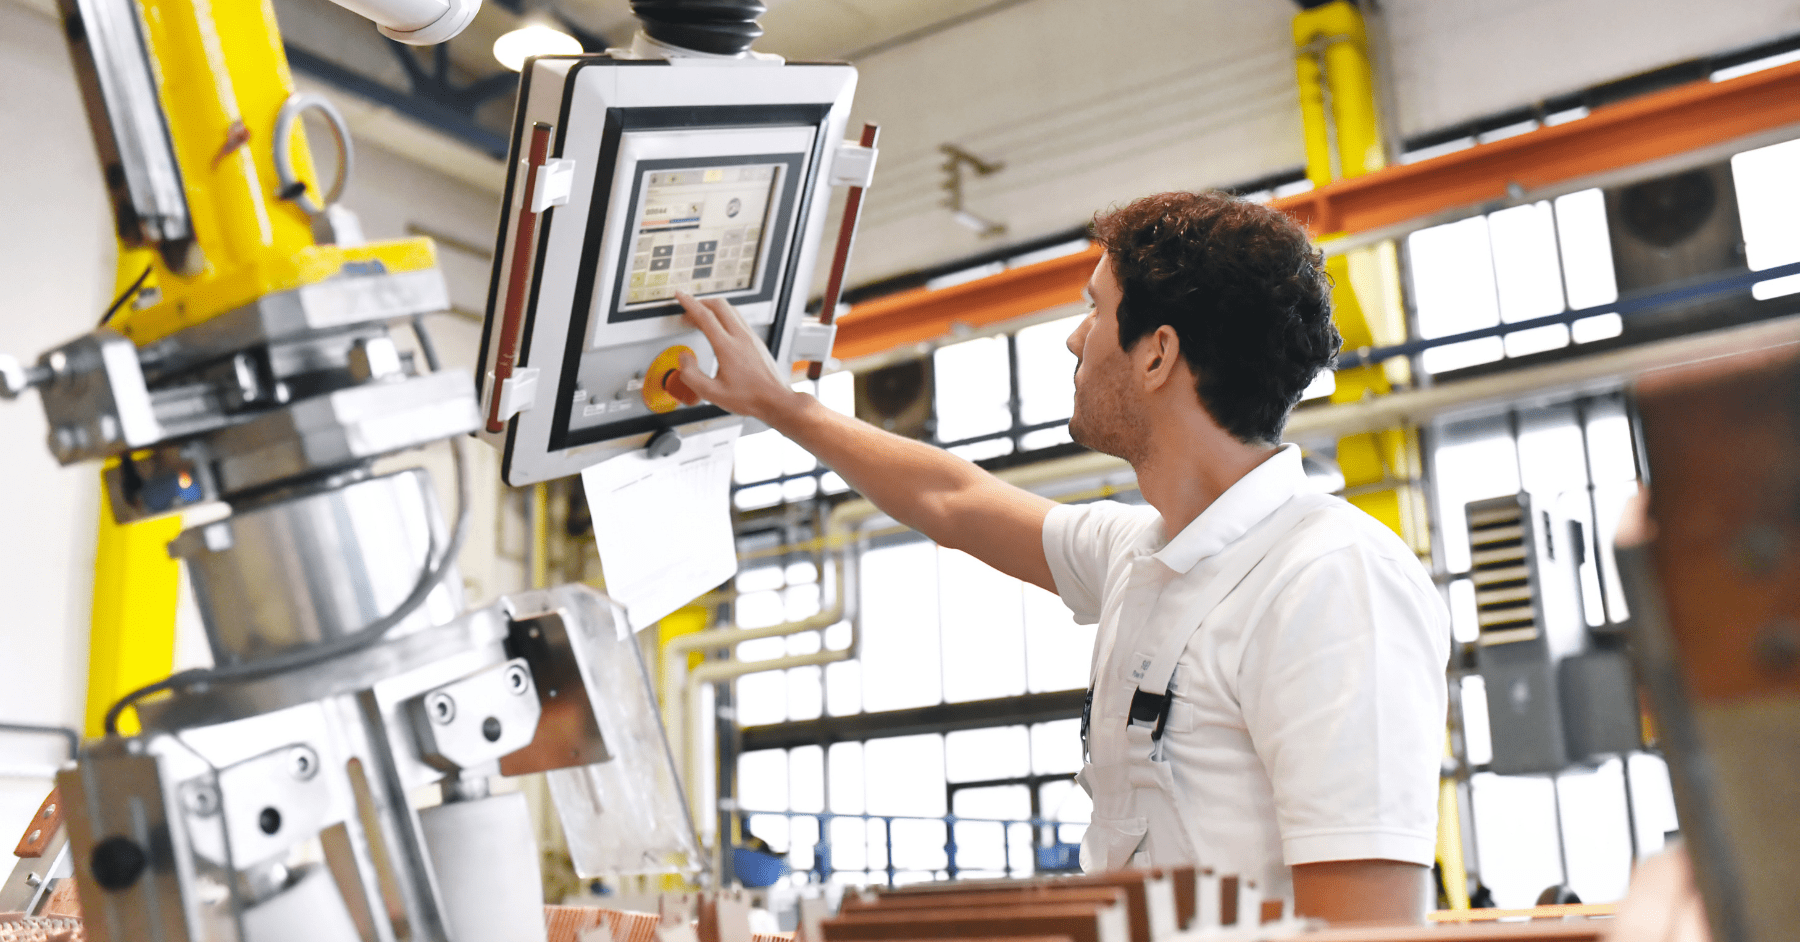 Kahuna-and-Dozuki-Skill-Centric-Approach-to-Training-Manufacturing